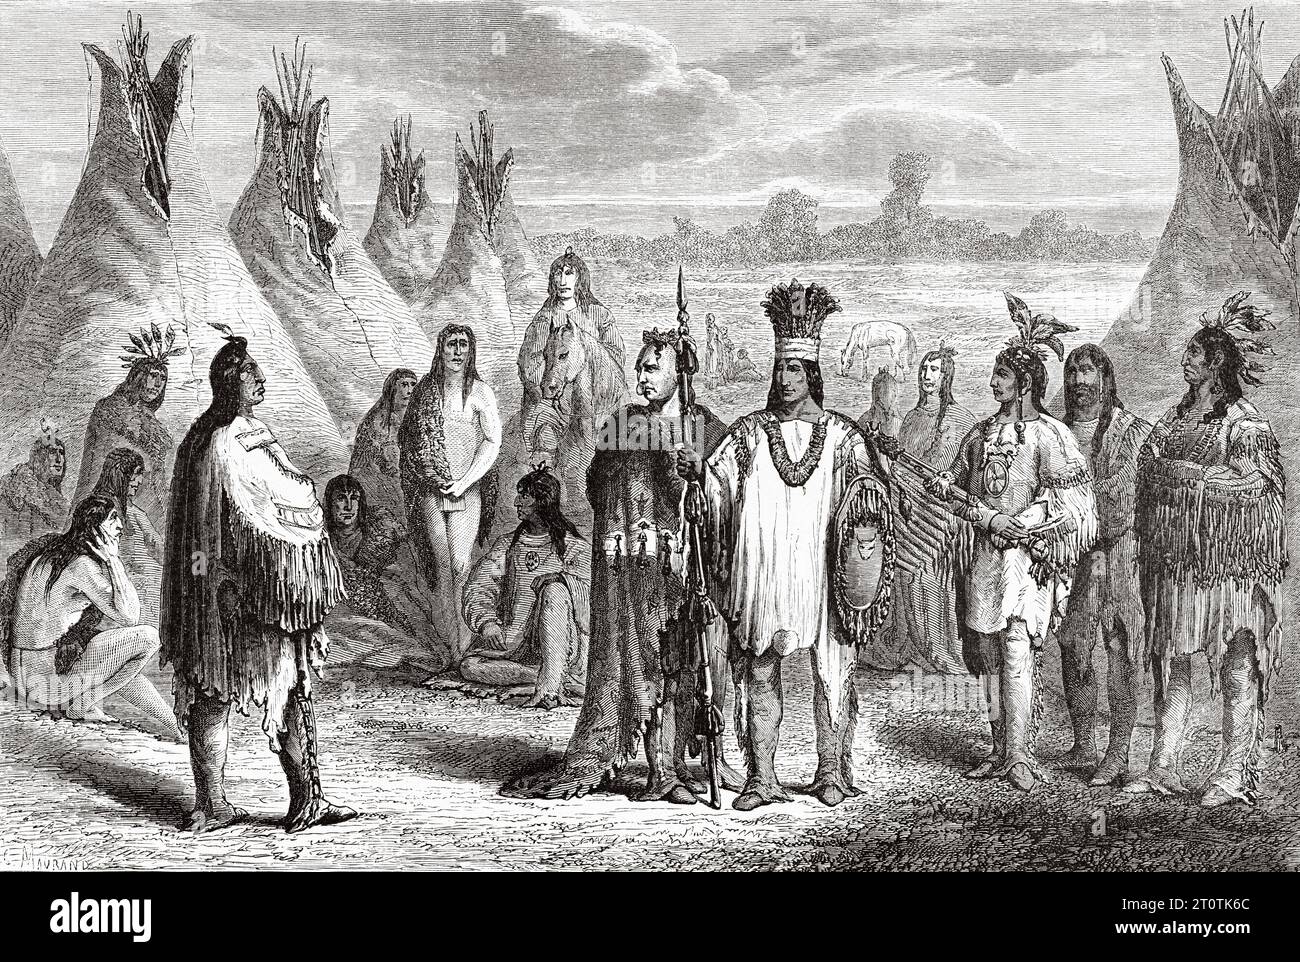 Cree indians, USA. Exploration of the Rocky Mountains in 1857-1859 by Captain John Palliser. Old 19th century engraving from Le Tour du Monde 1860 Stock Photo